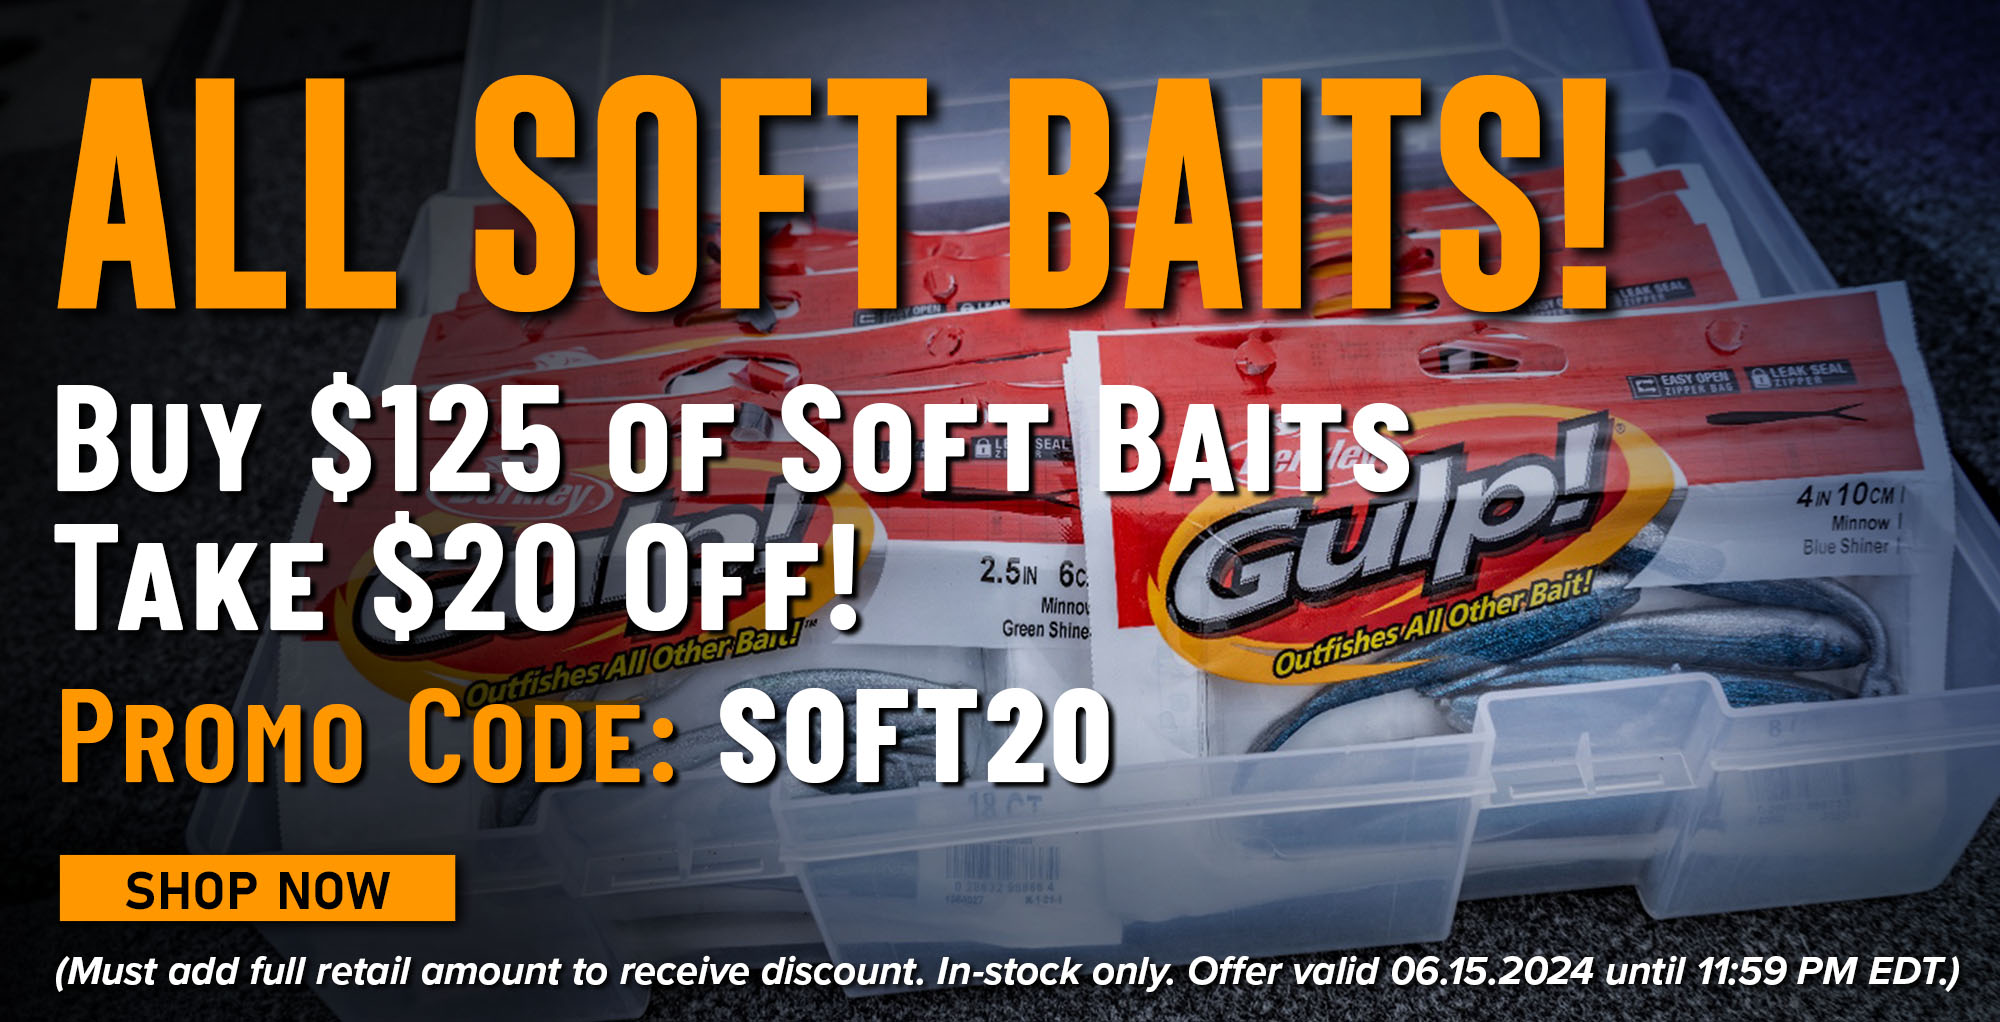 All Soft Baits Buy $150 of Soft Baits - Take $20 Off! Promo Code - SOFT20 Shop Now (Must add full retail amount to receive discount. In-stock only. Offer valid 06.15.2024 until 11:59 PM EDT.)